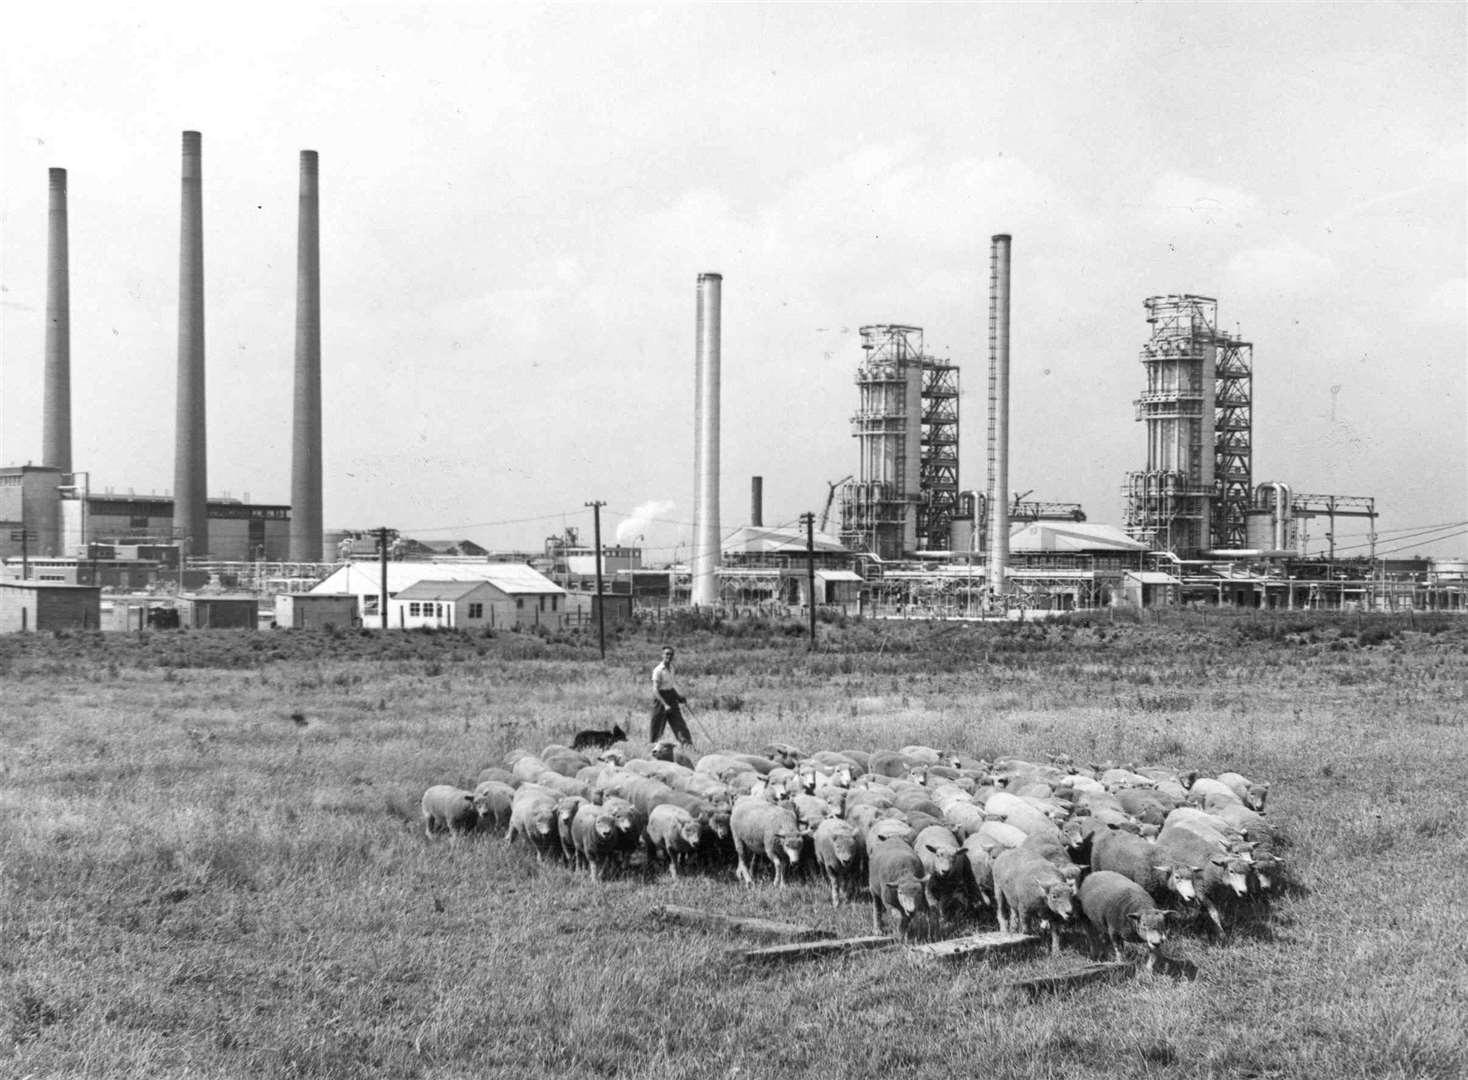 Traditional farming was maintained at the Isle of Grain in the mid-1950s, when a giant BP refinery was well into production